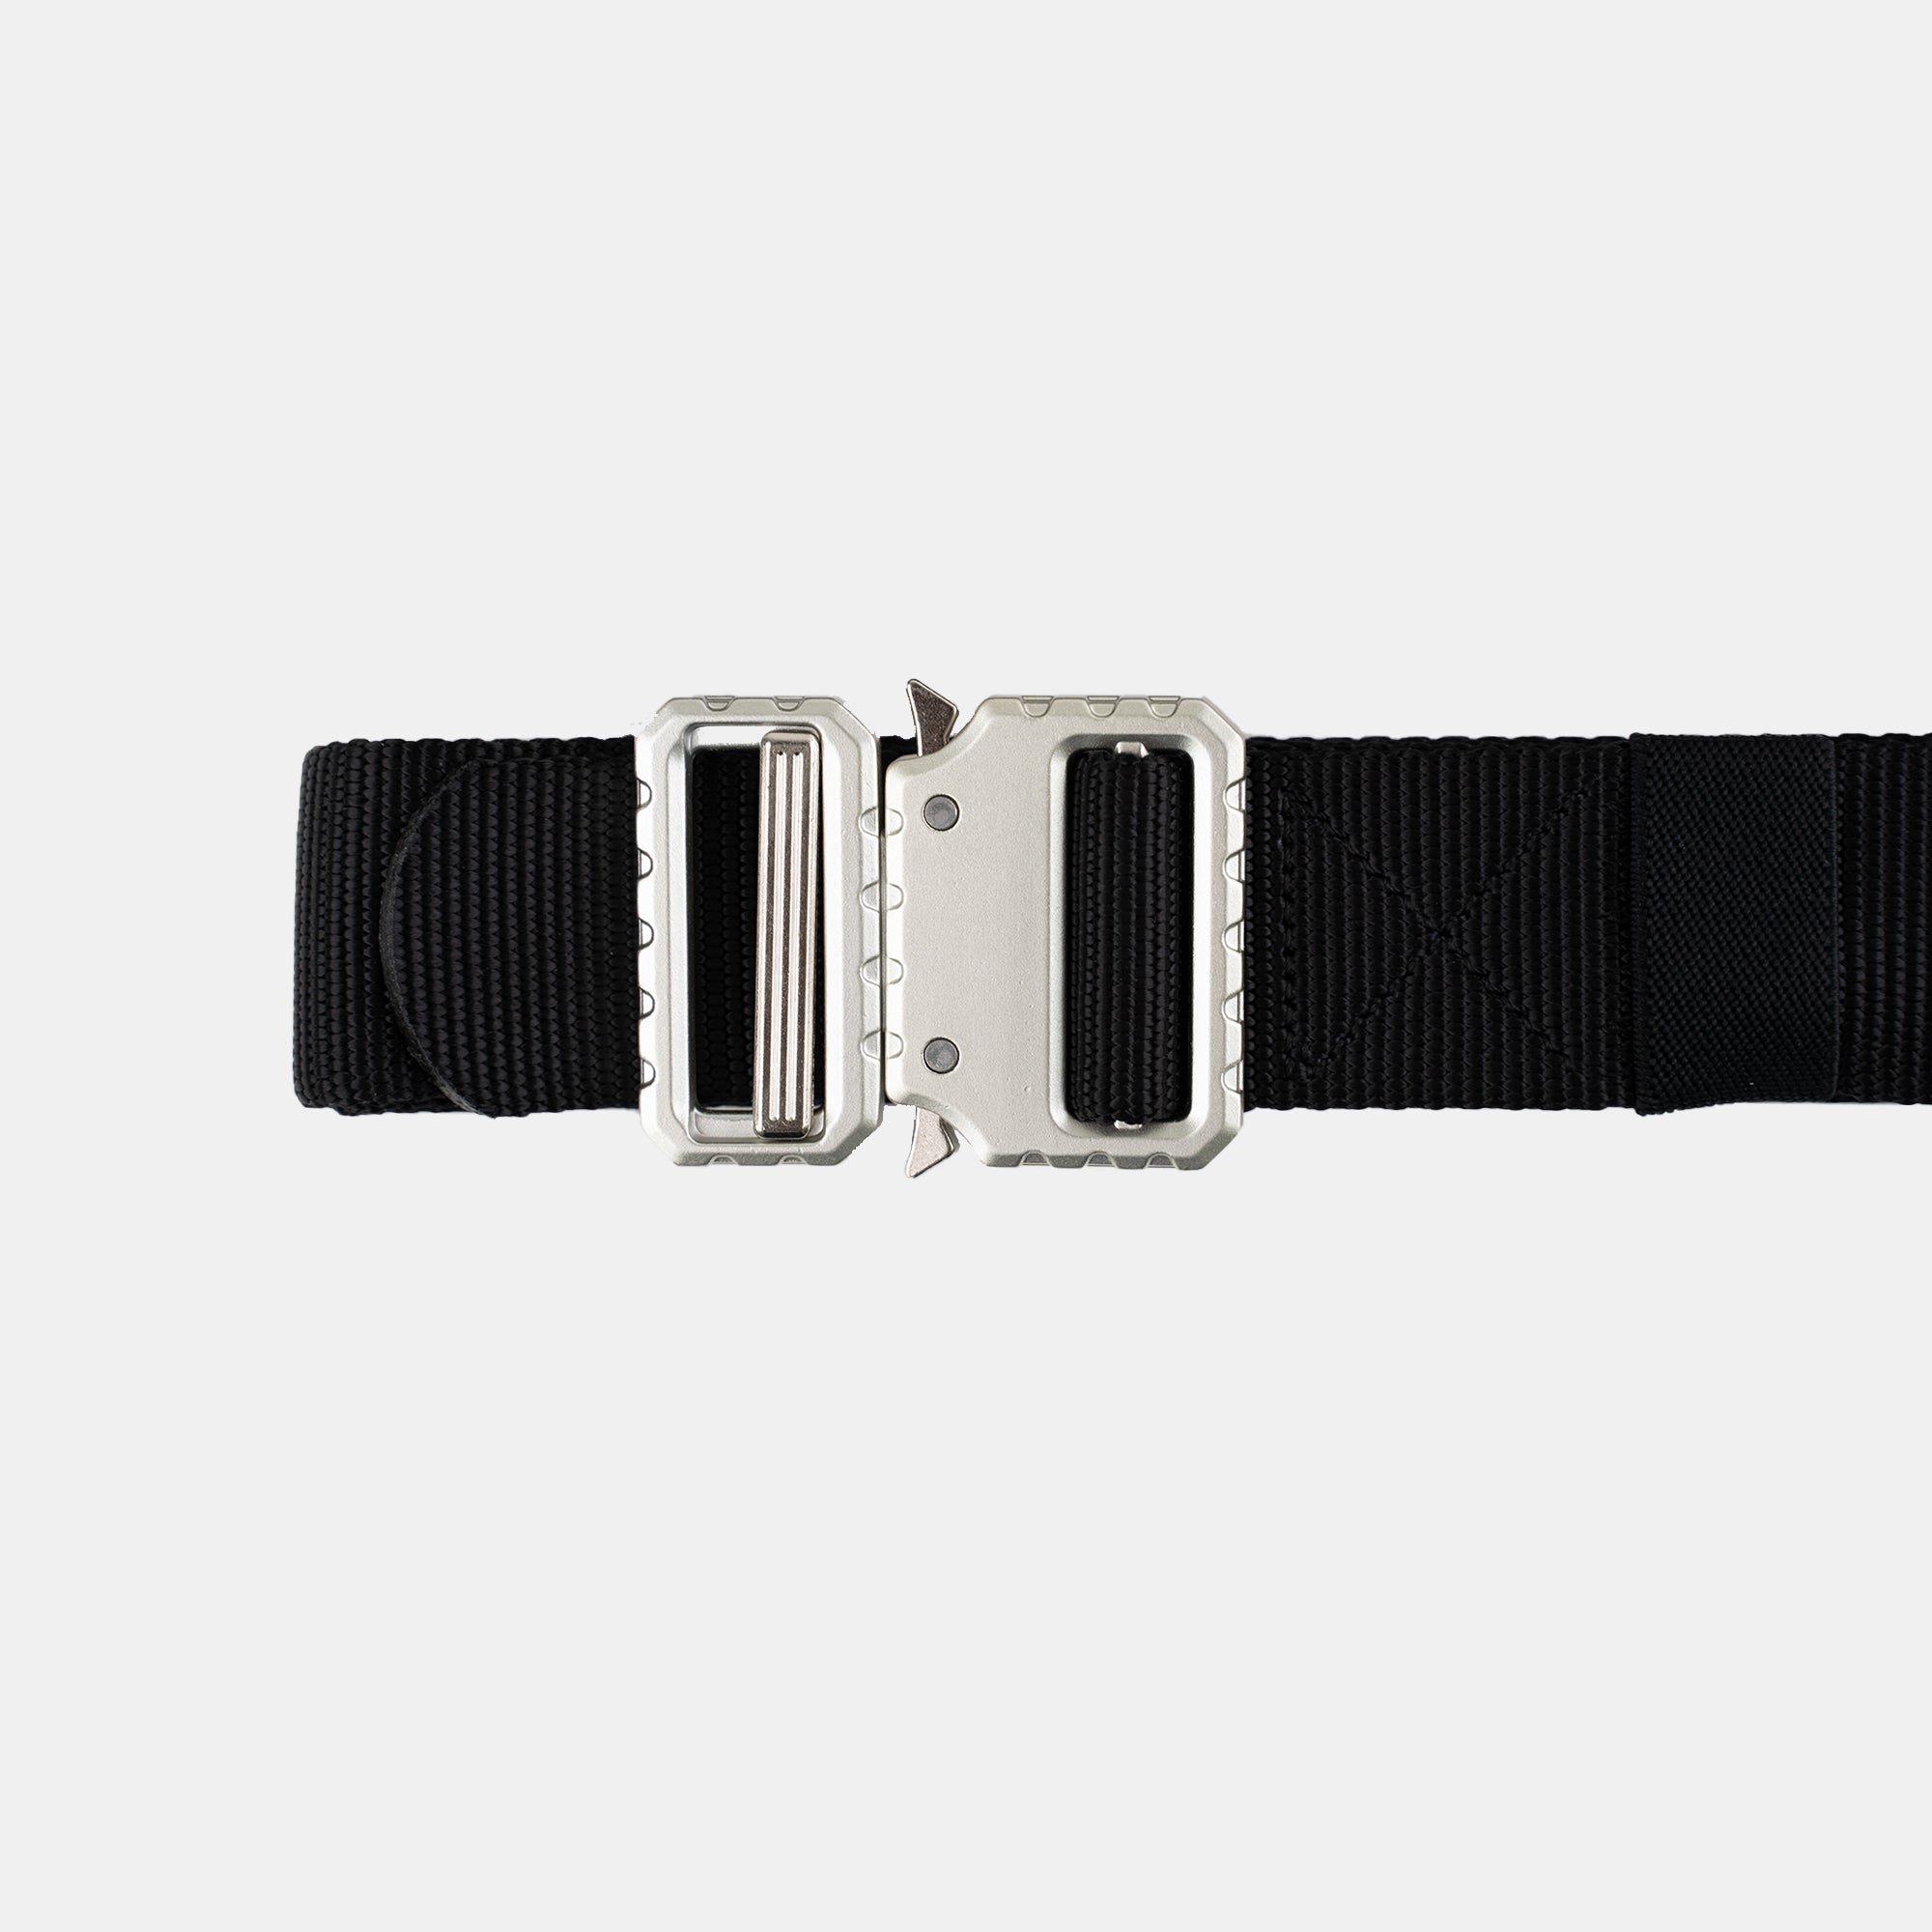 HALO TACTICAL BELT (SILVER)